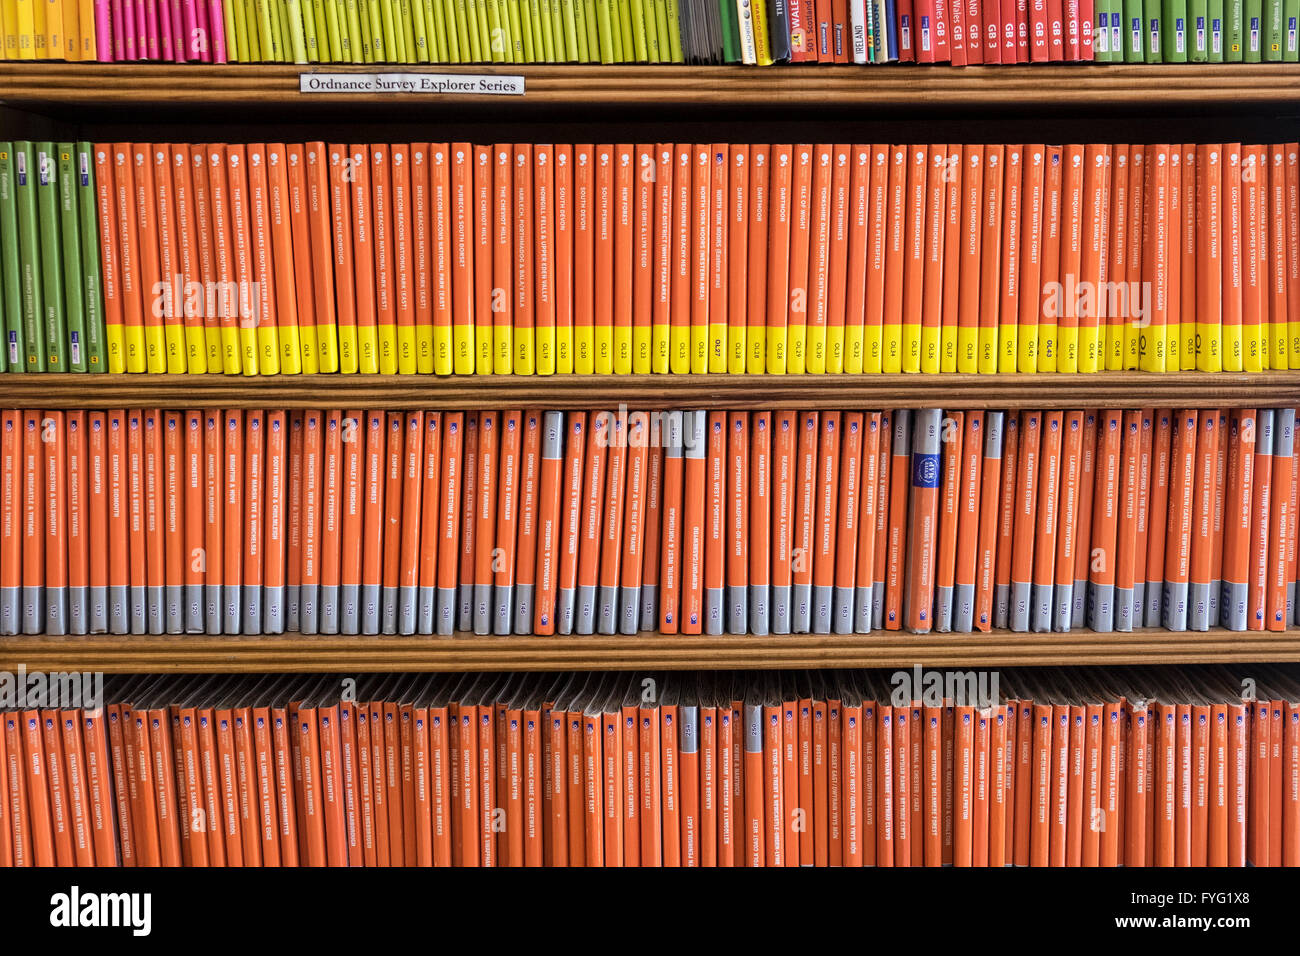 Rows of ordinance survey maps on sale in a bookshop in England Stock Photo